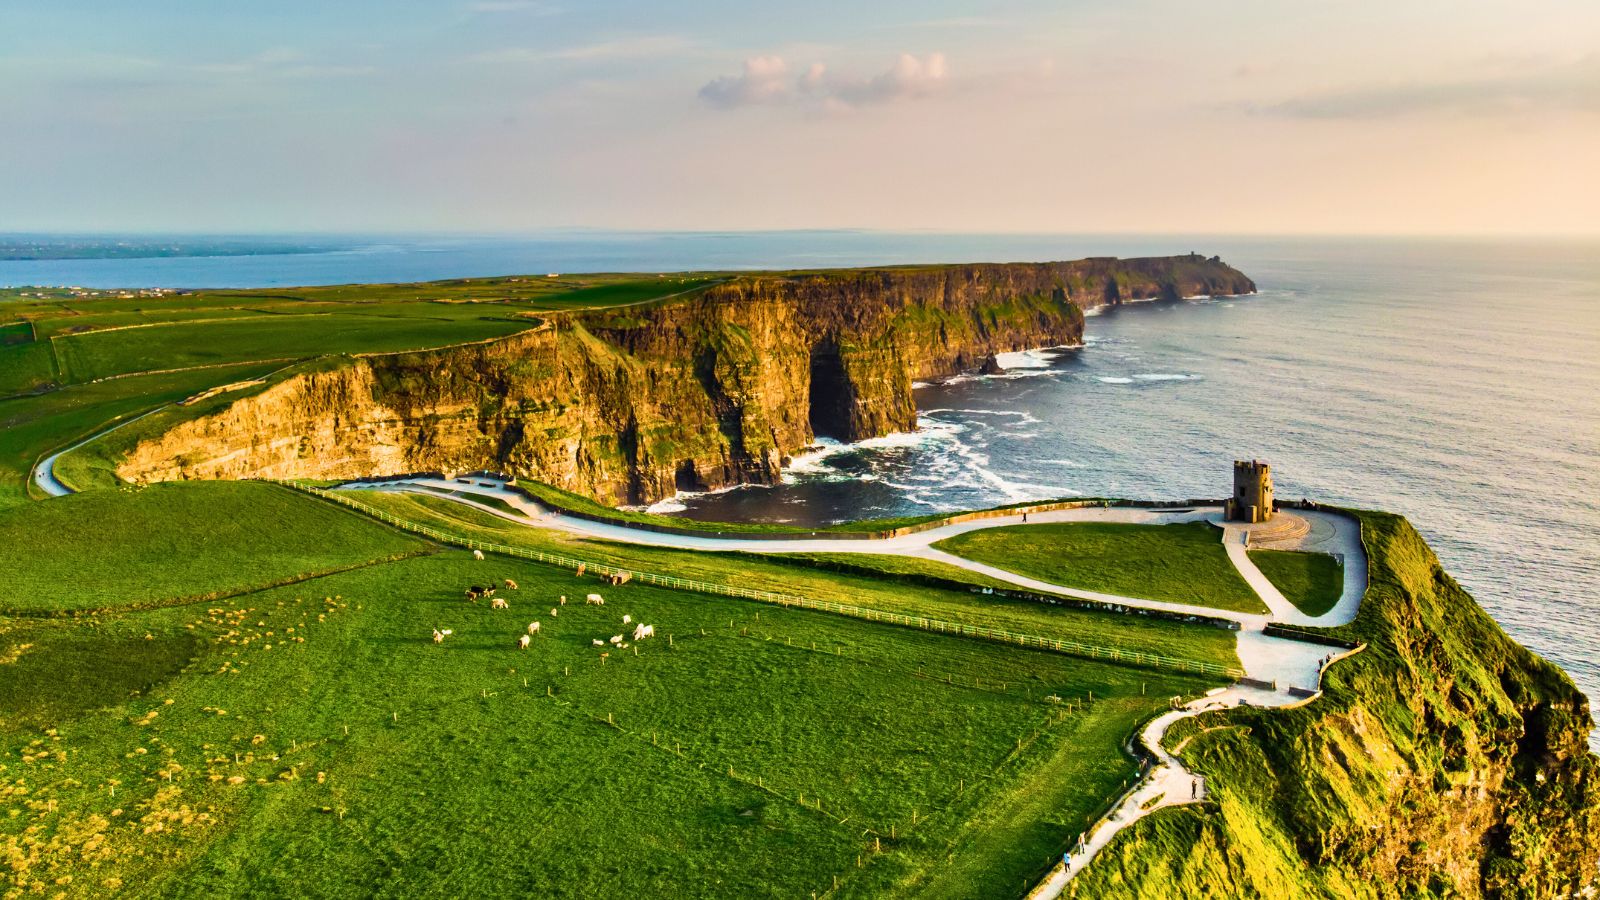 <p>When is the best time to visit Ireland? It’s hard to say, but here’s all the information you need about Ireland’s four seasons to decide.</p><p><a href="https://www.whatsdannydoing.com/best-time-to-visit-ireland" rel="noopener"><strong>THE BEST TIME TO VISIT IRELAND FOR YOU</strong></a></p>